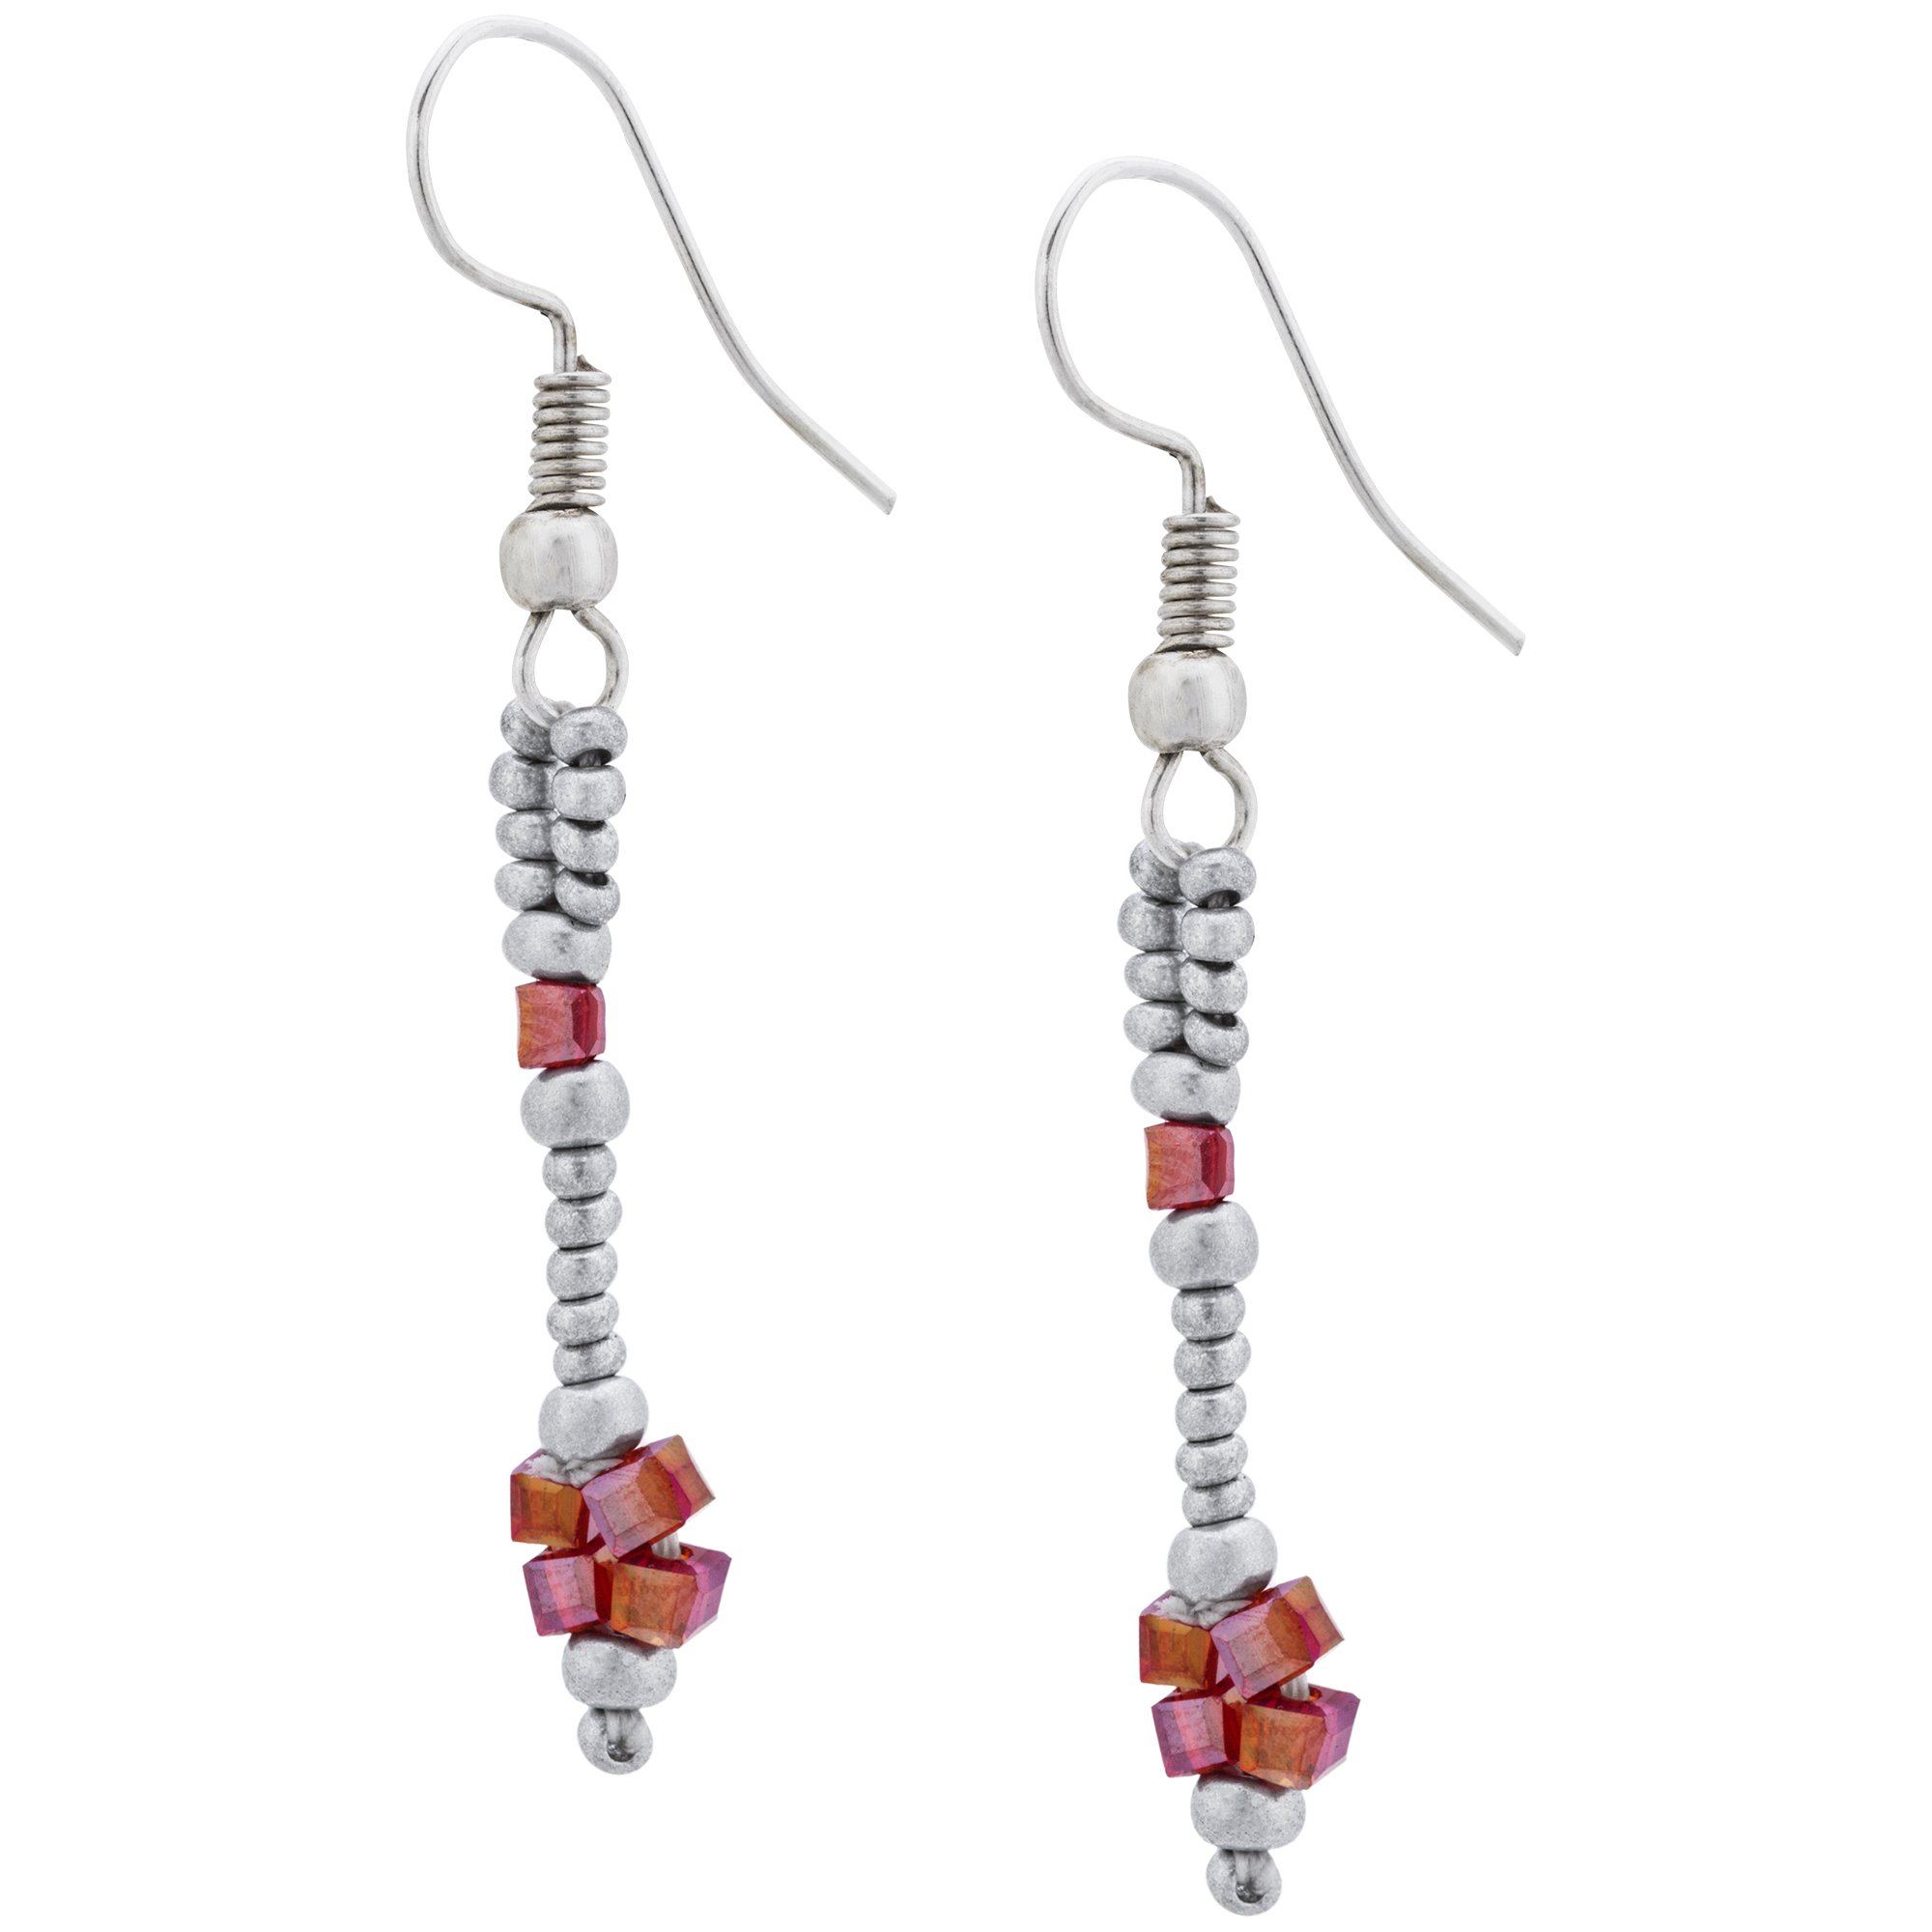 Four Square Earrings - Red